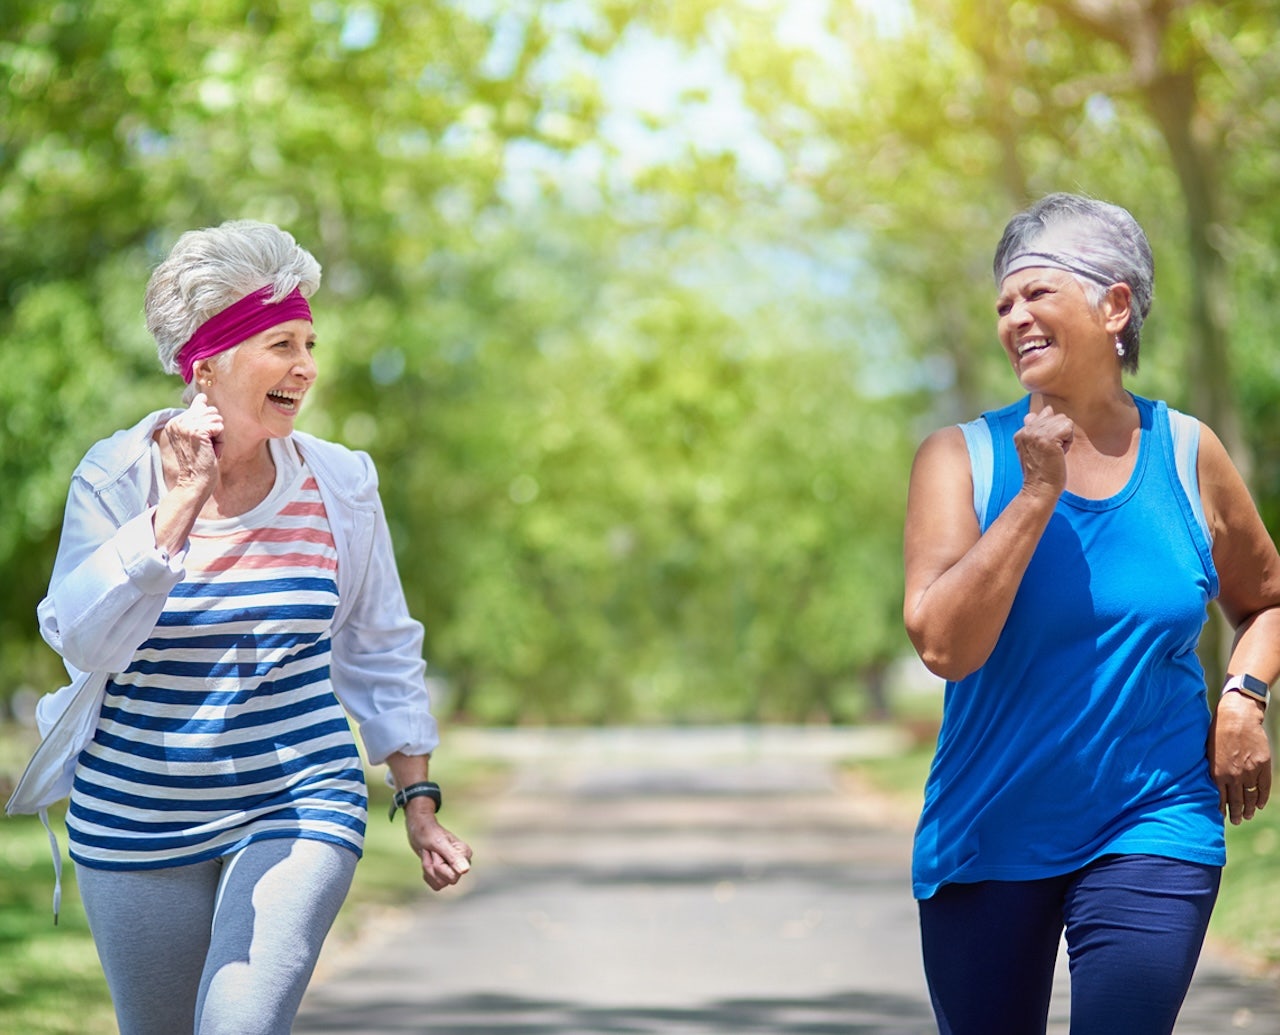 For women over 60, here is the number of daily steps needed to protect heart health